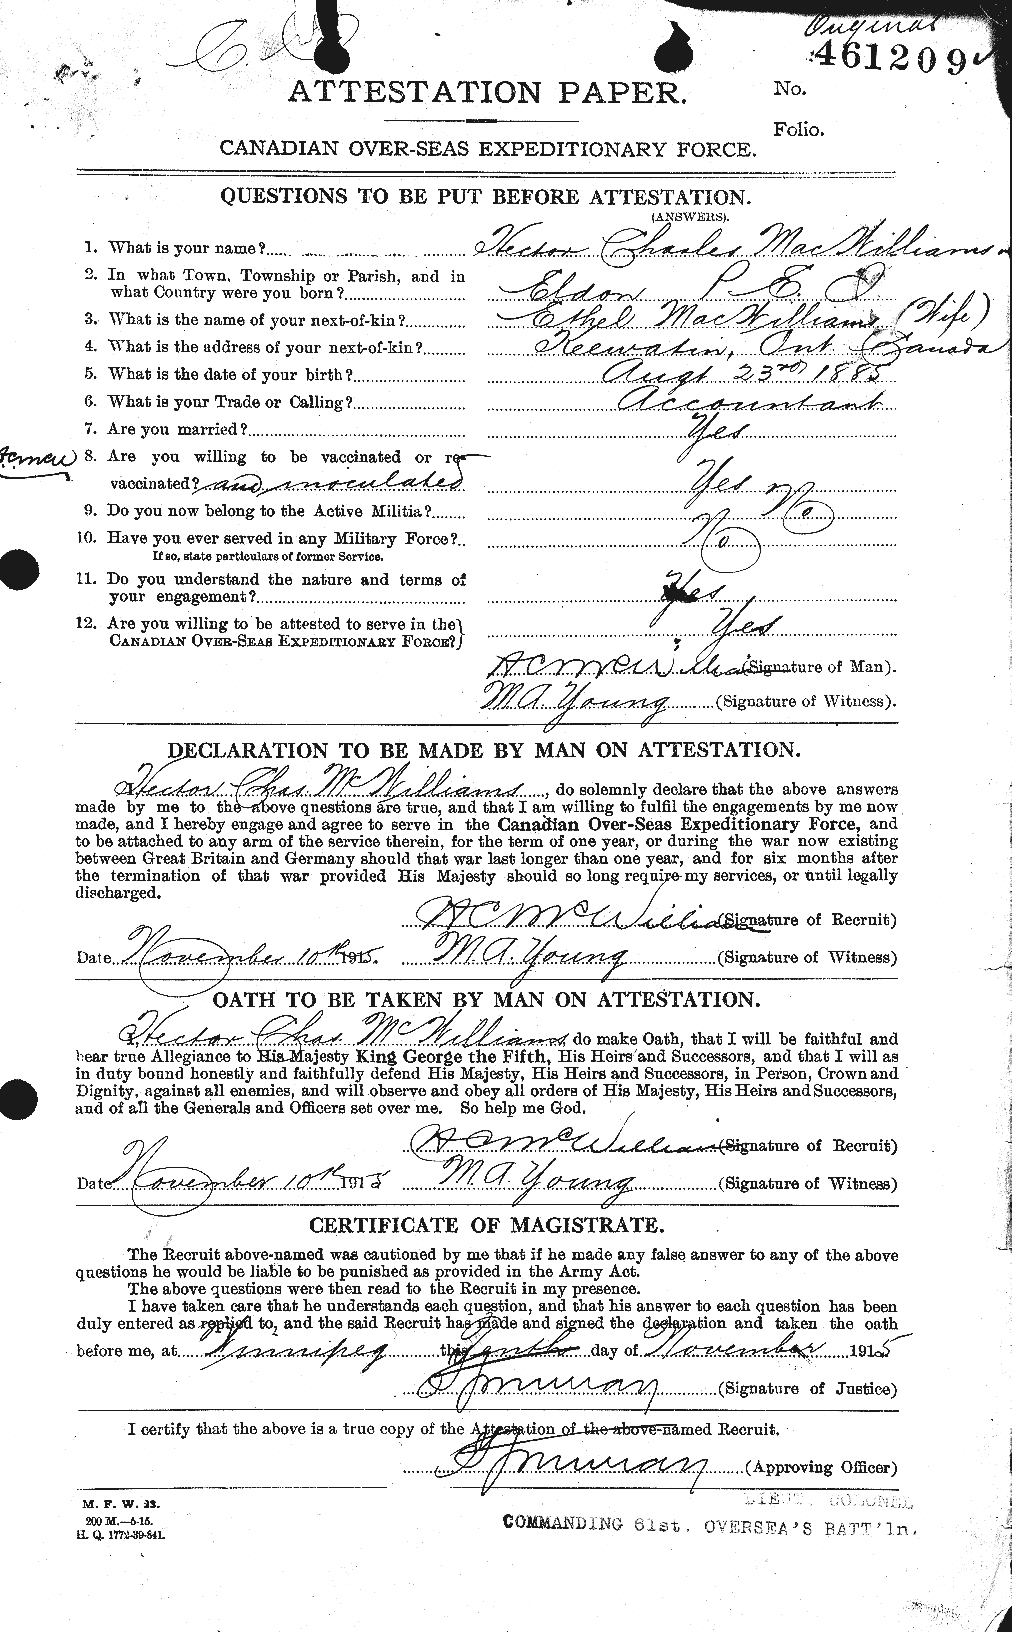 Personnel Records of the First World War - CEF 549611a